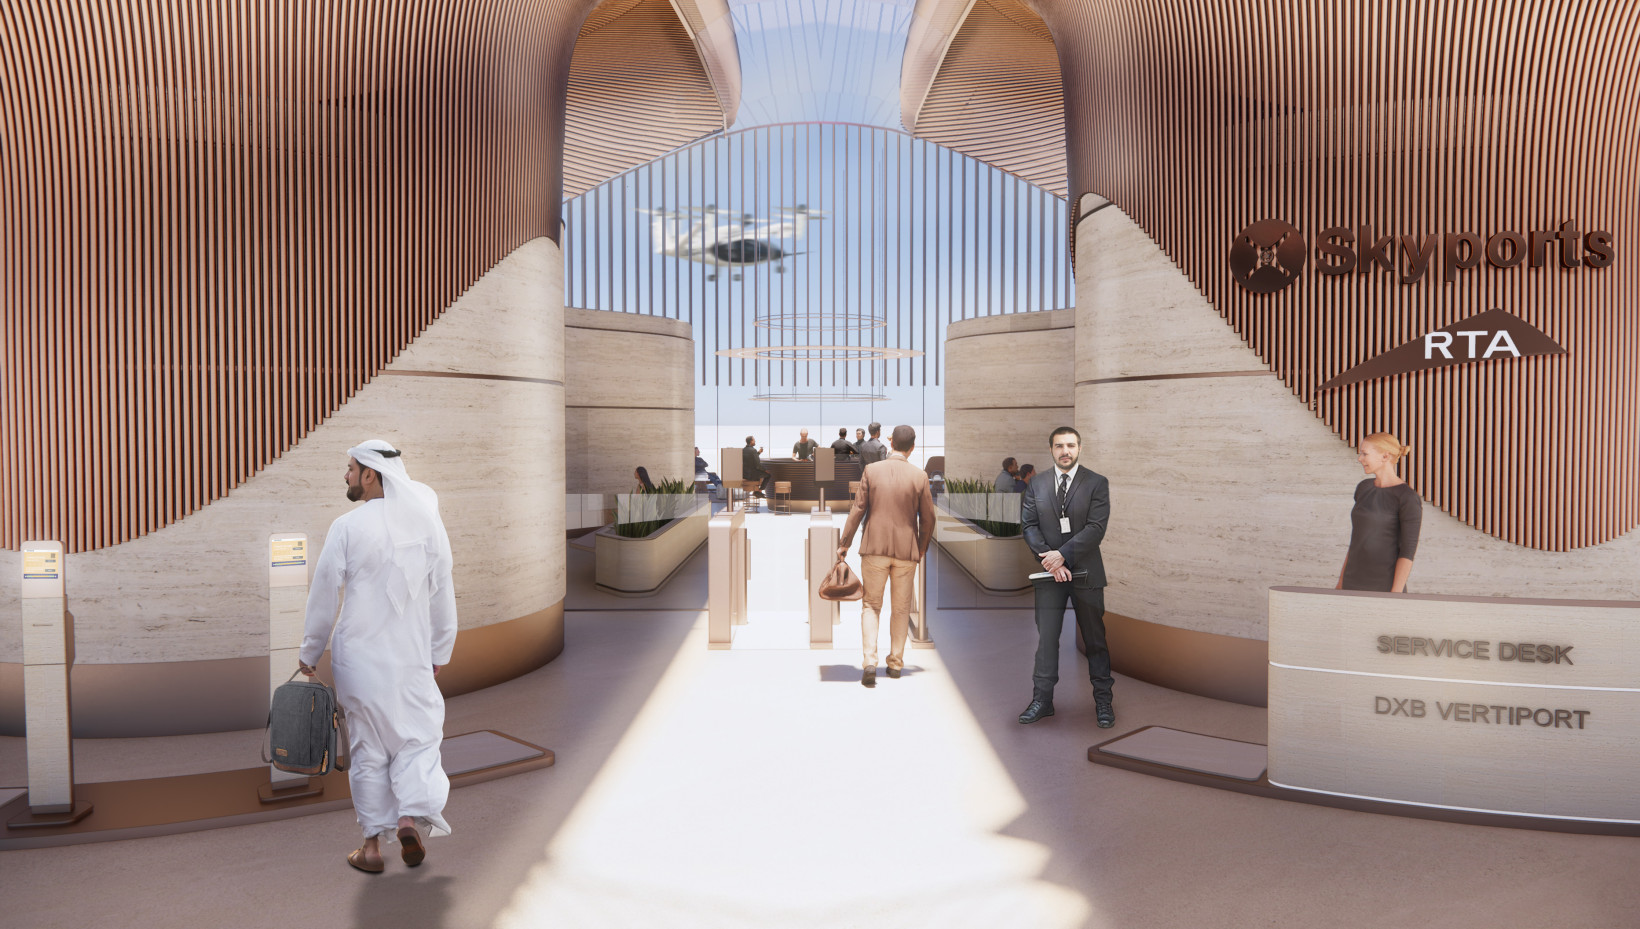 A render of the interior of the Dubai vertiport